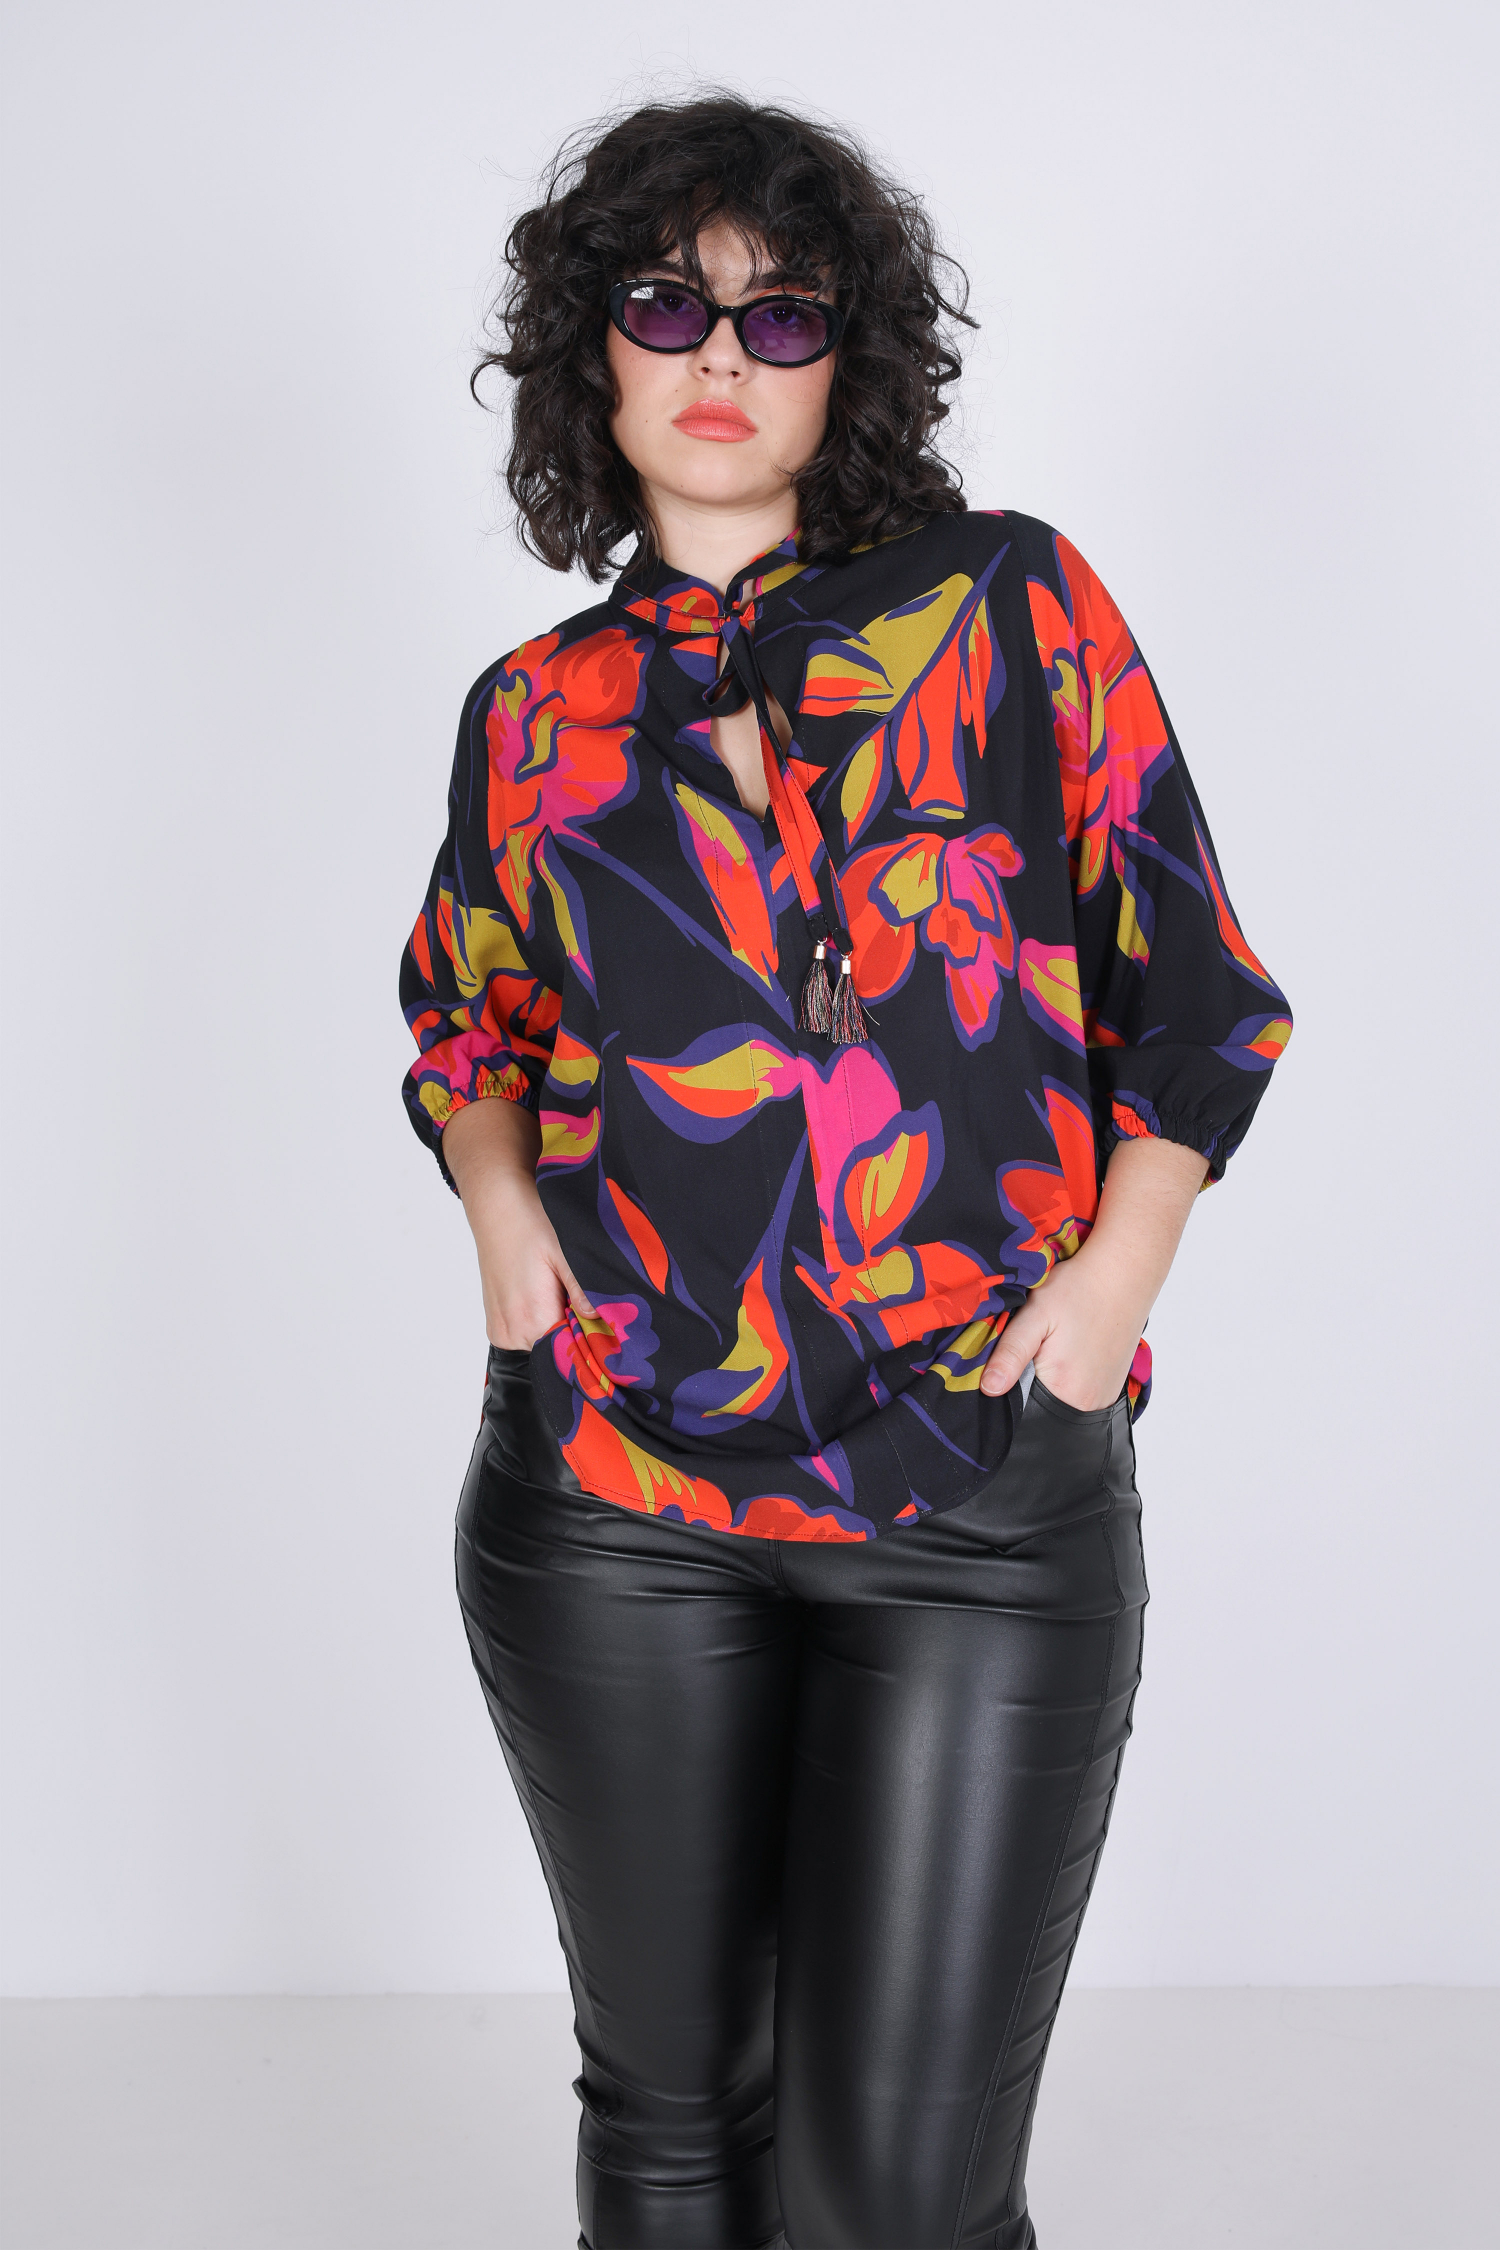 Floral print blouse (expedition 5/10 November)